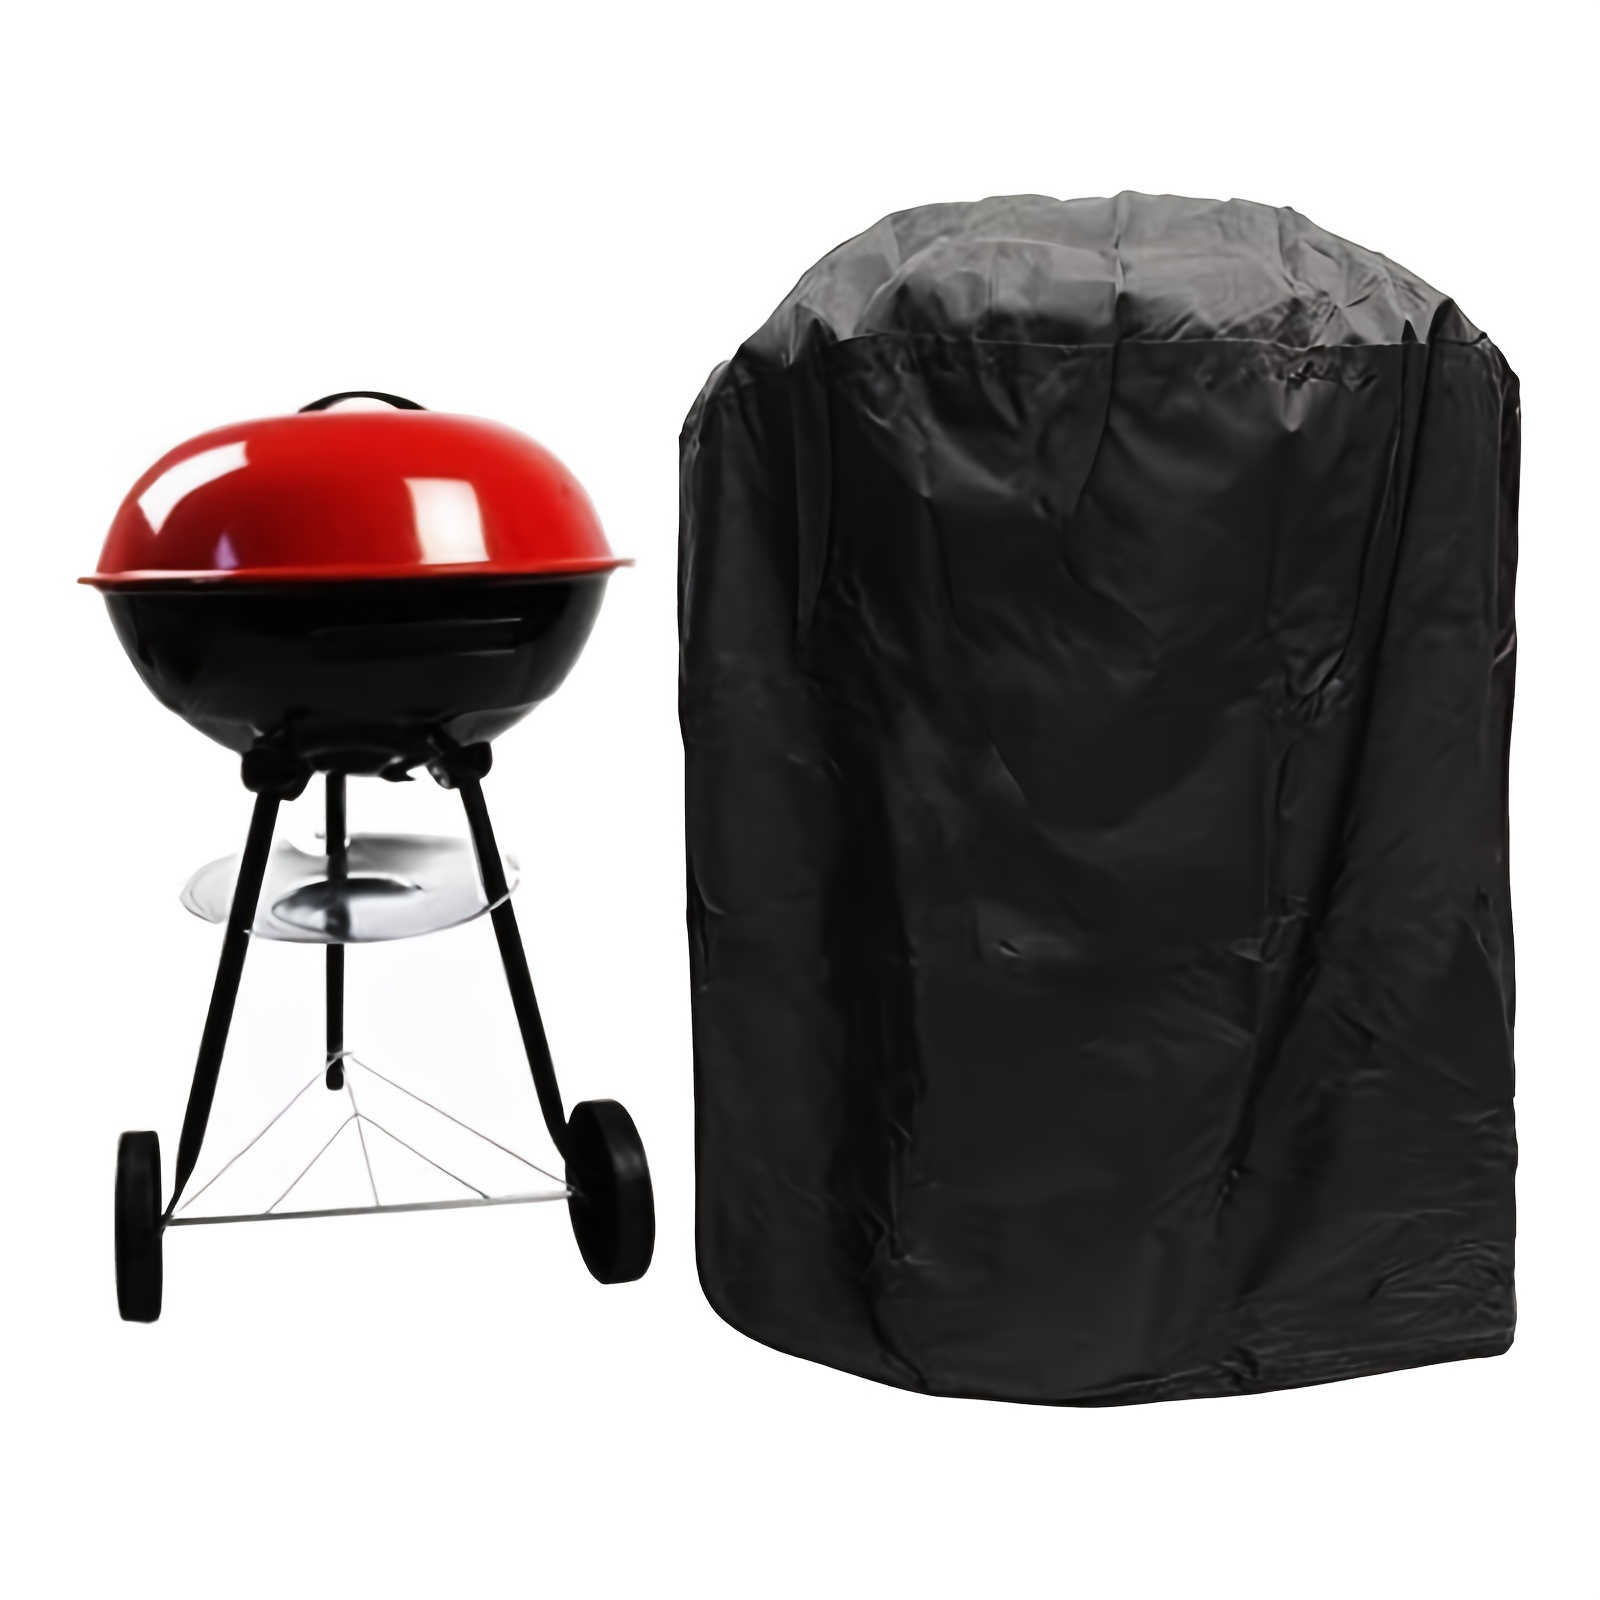 Protect Your Outdoor Grill with This Durable, Waterproof Round Barbecue  Grill Cover!